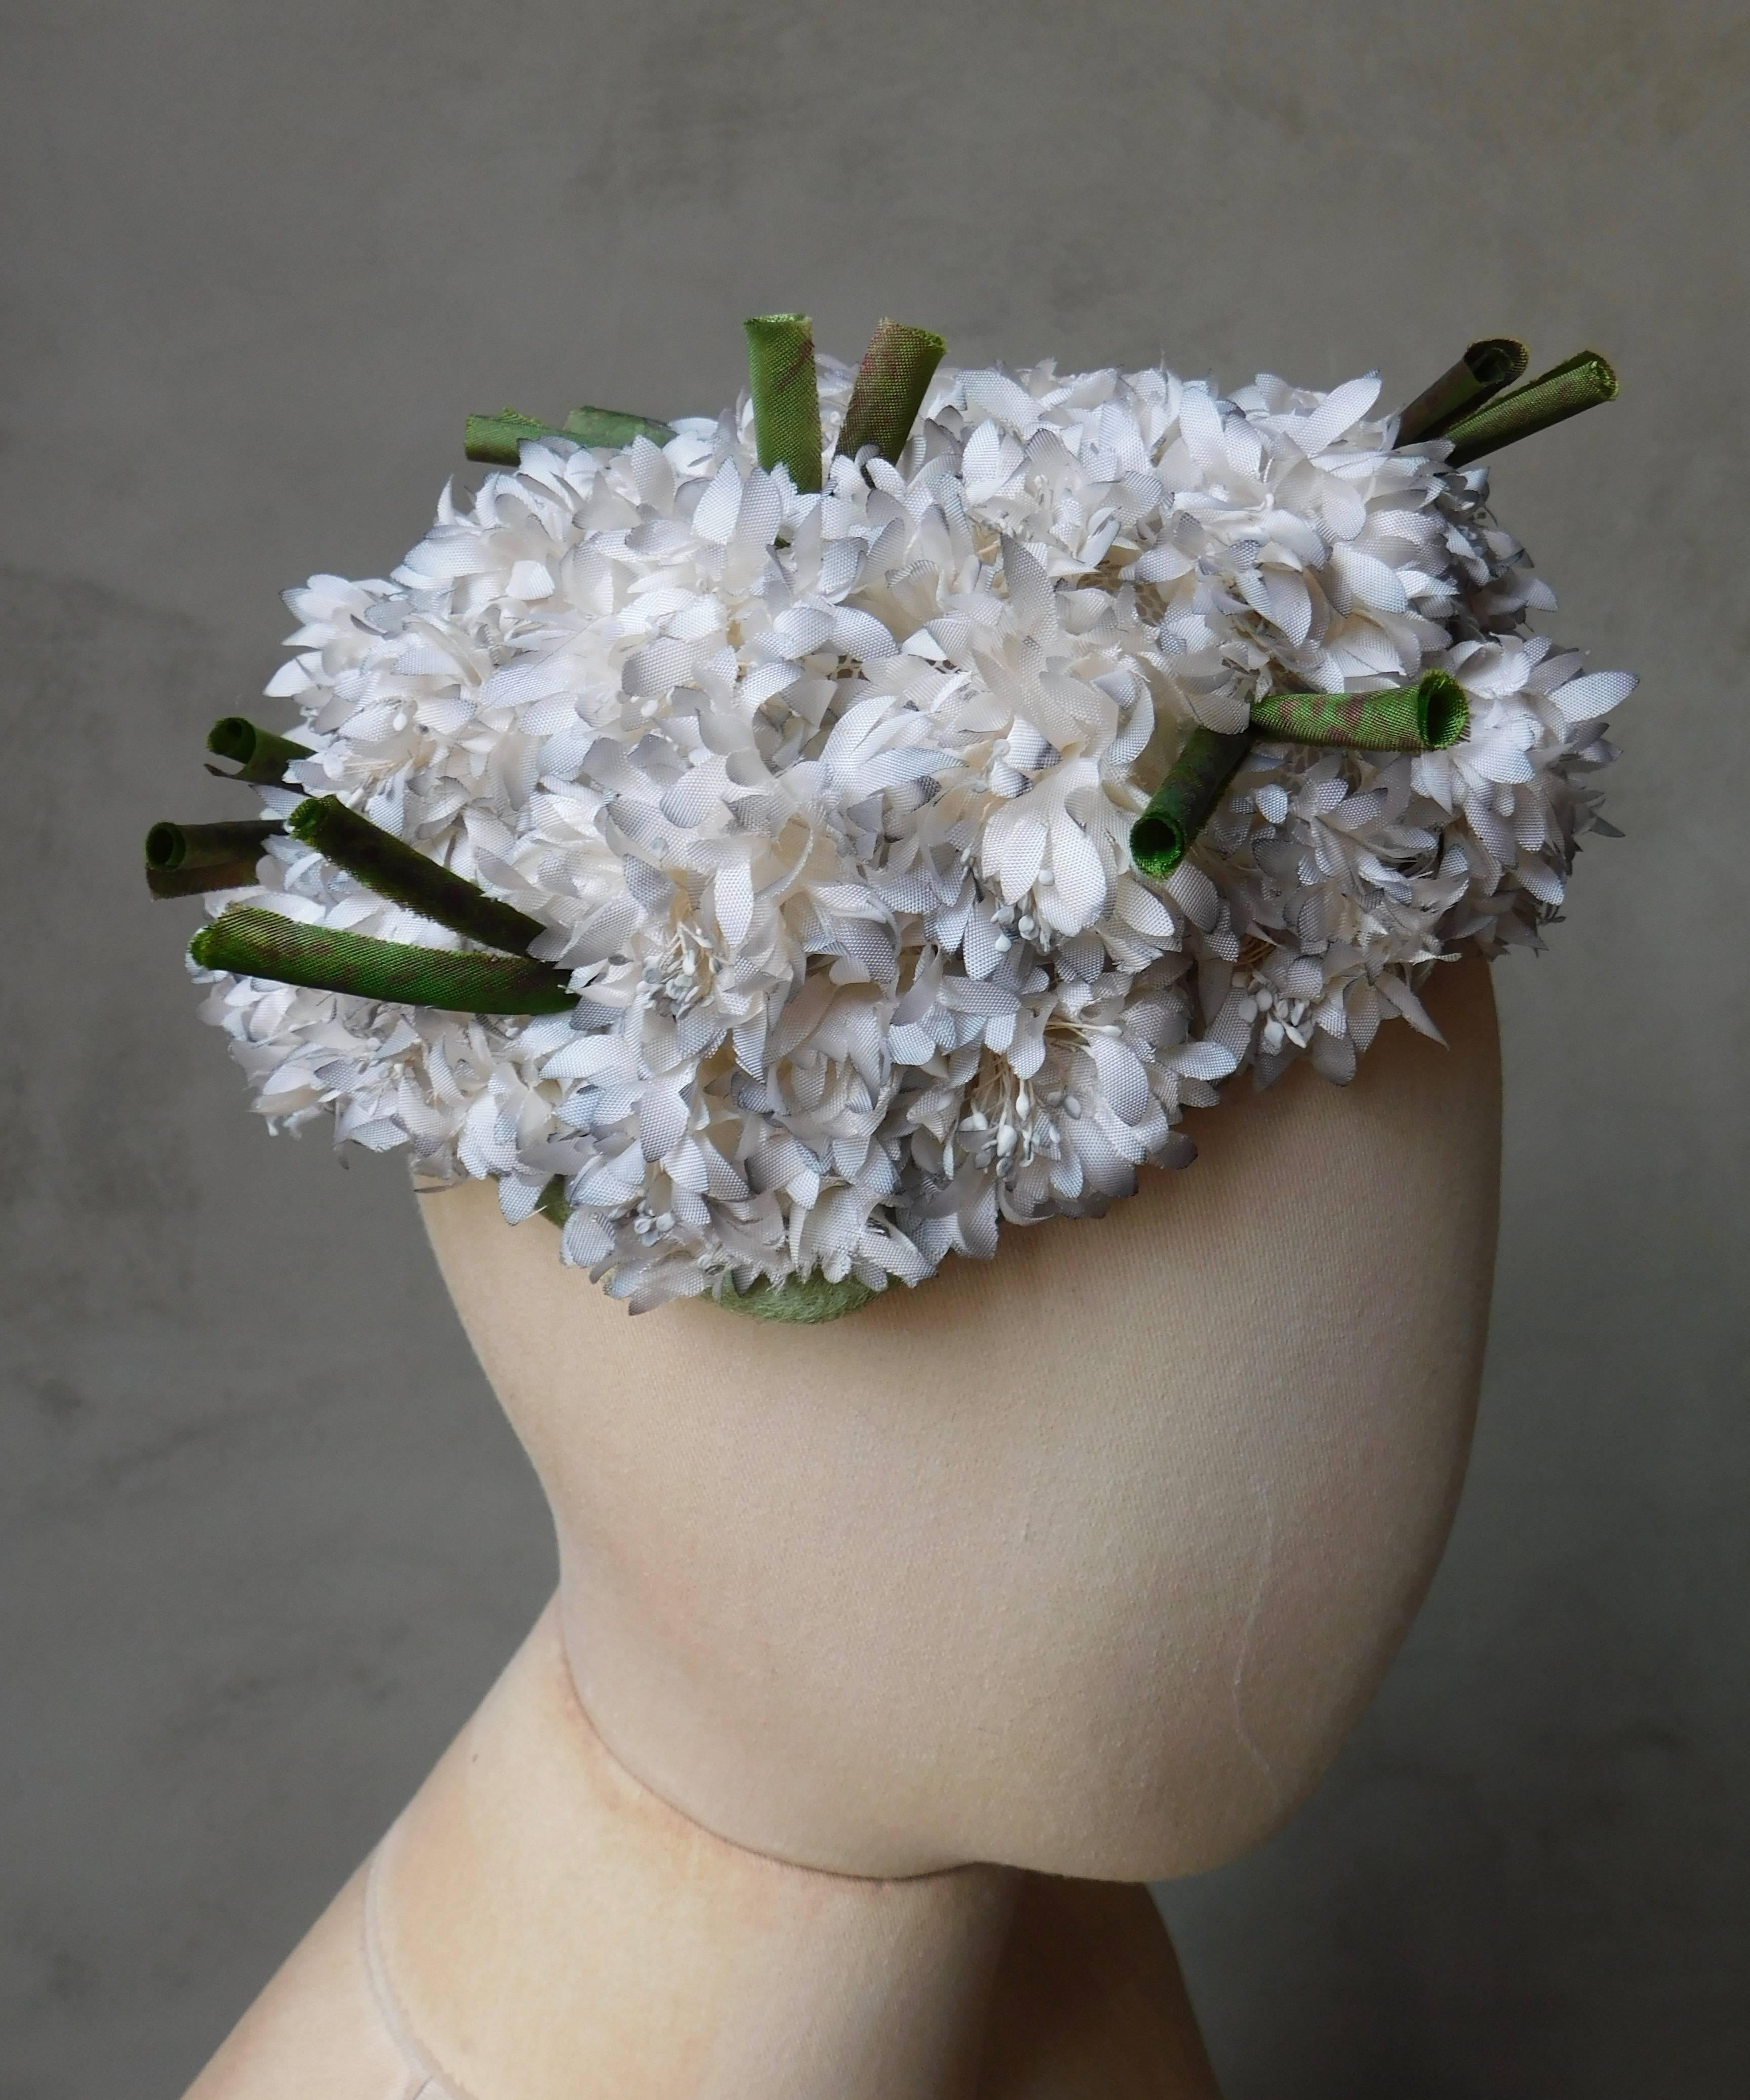 Gray 1960's Hat Fully covered in Small White Silk Flowers By Maison de Bonneterie